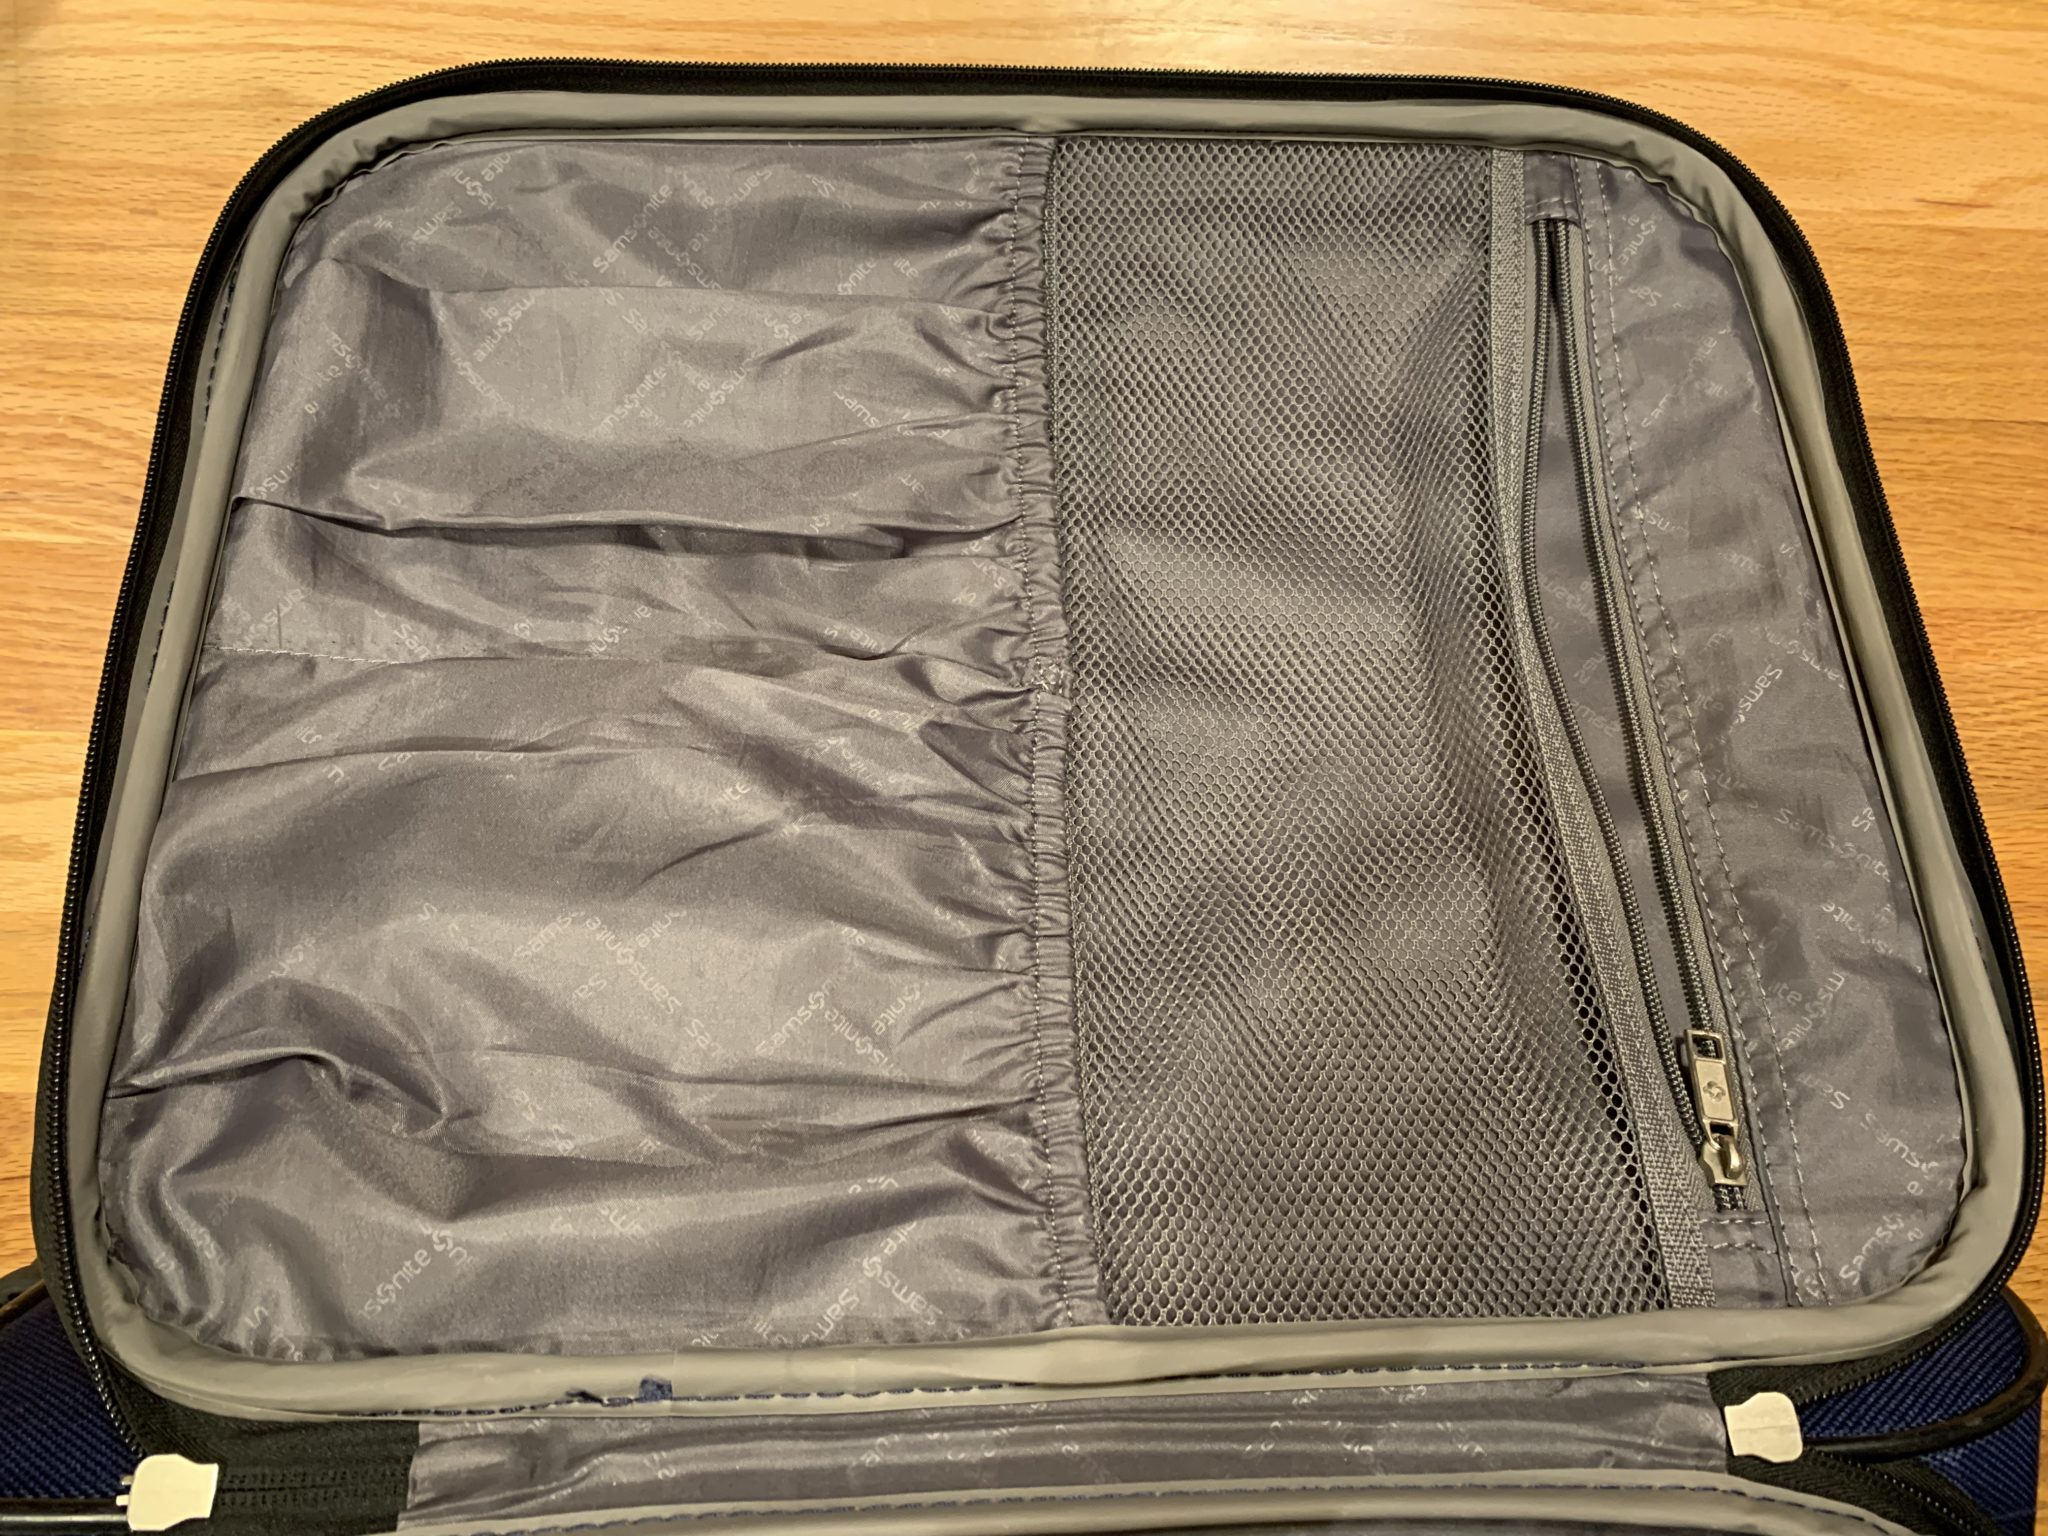 Cheap Samsonite Luggage At Ross Dress For Less | The Off Brand Guy